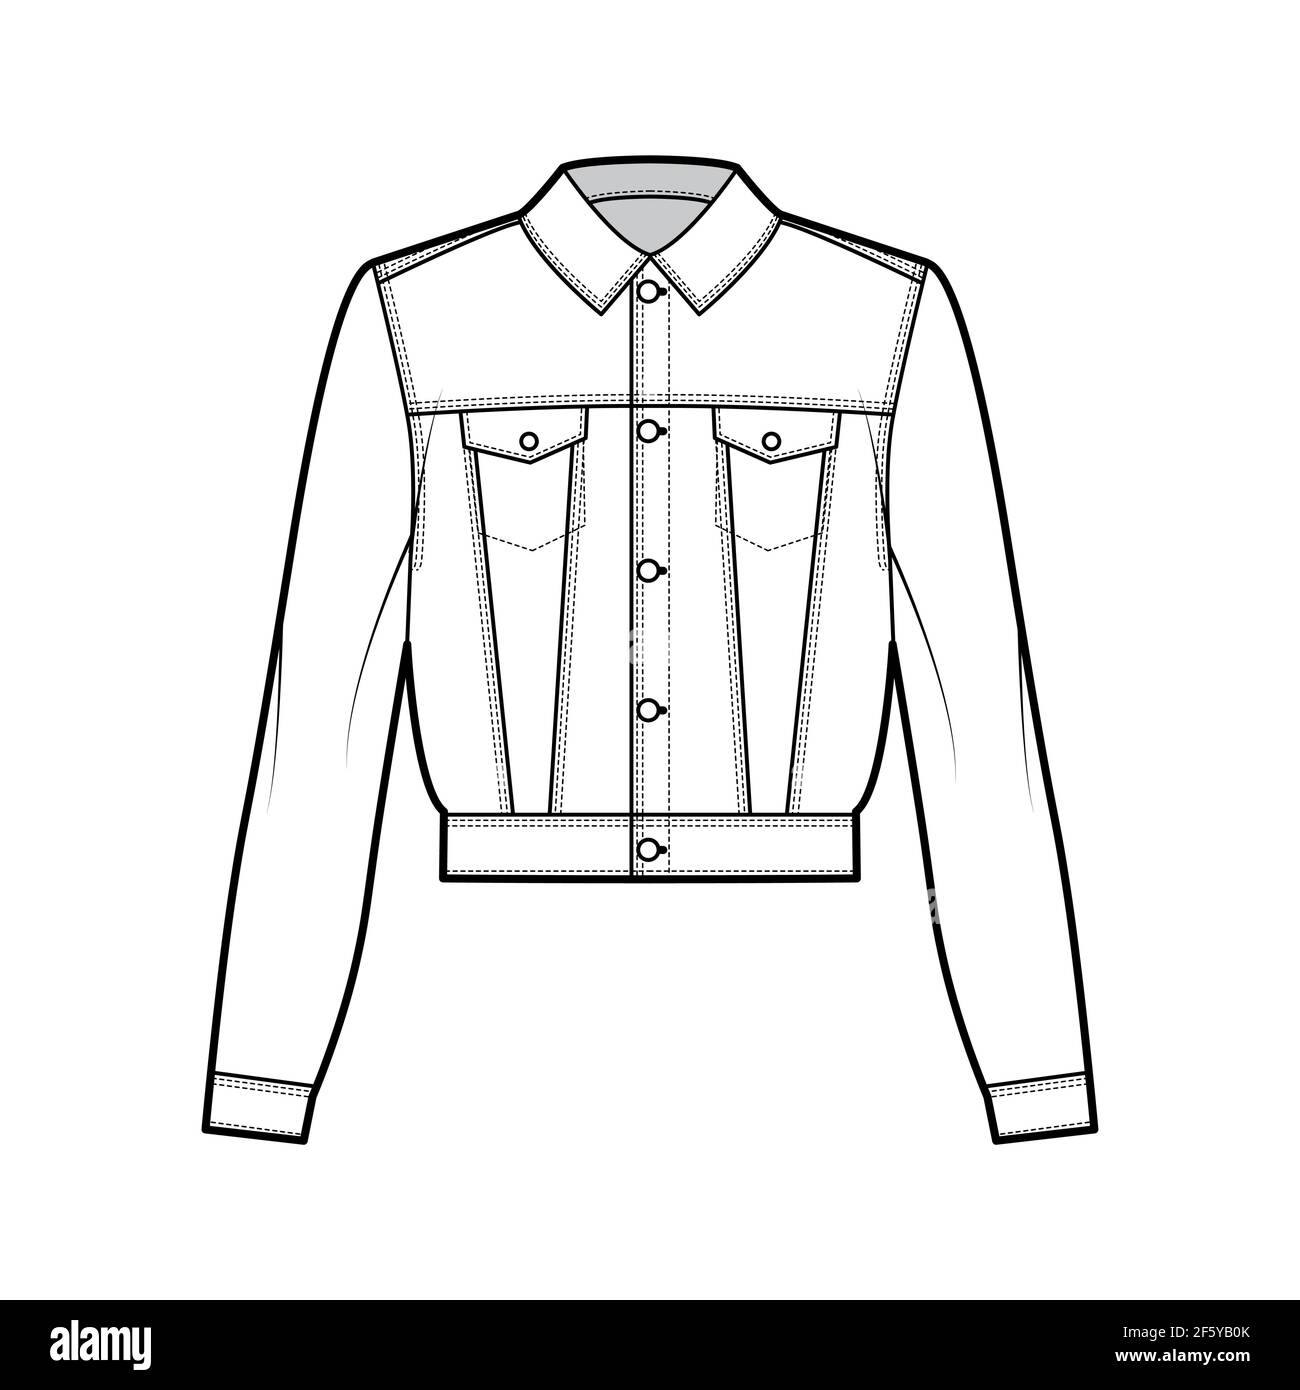 Cropped denim jacket technical fashion illustration with full waist length, fitted body, flap pockets, button closure, collar, long sleeves. Flat apparel front, white color style. Women men CAD mockup Stock Vector